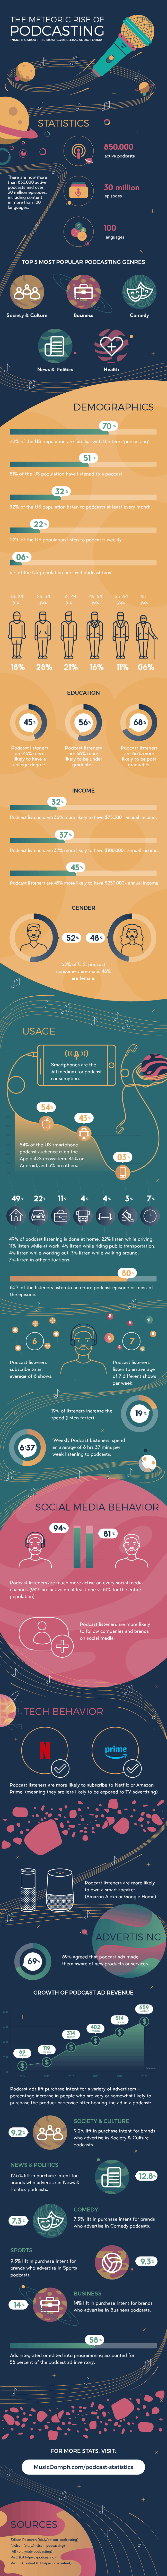 Podcast stats infographic - The data says to start a podcast today.